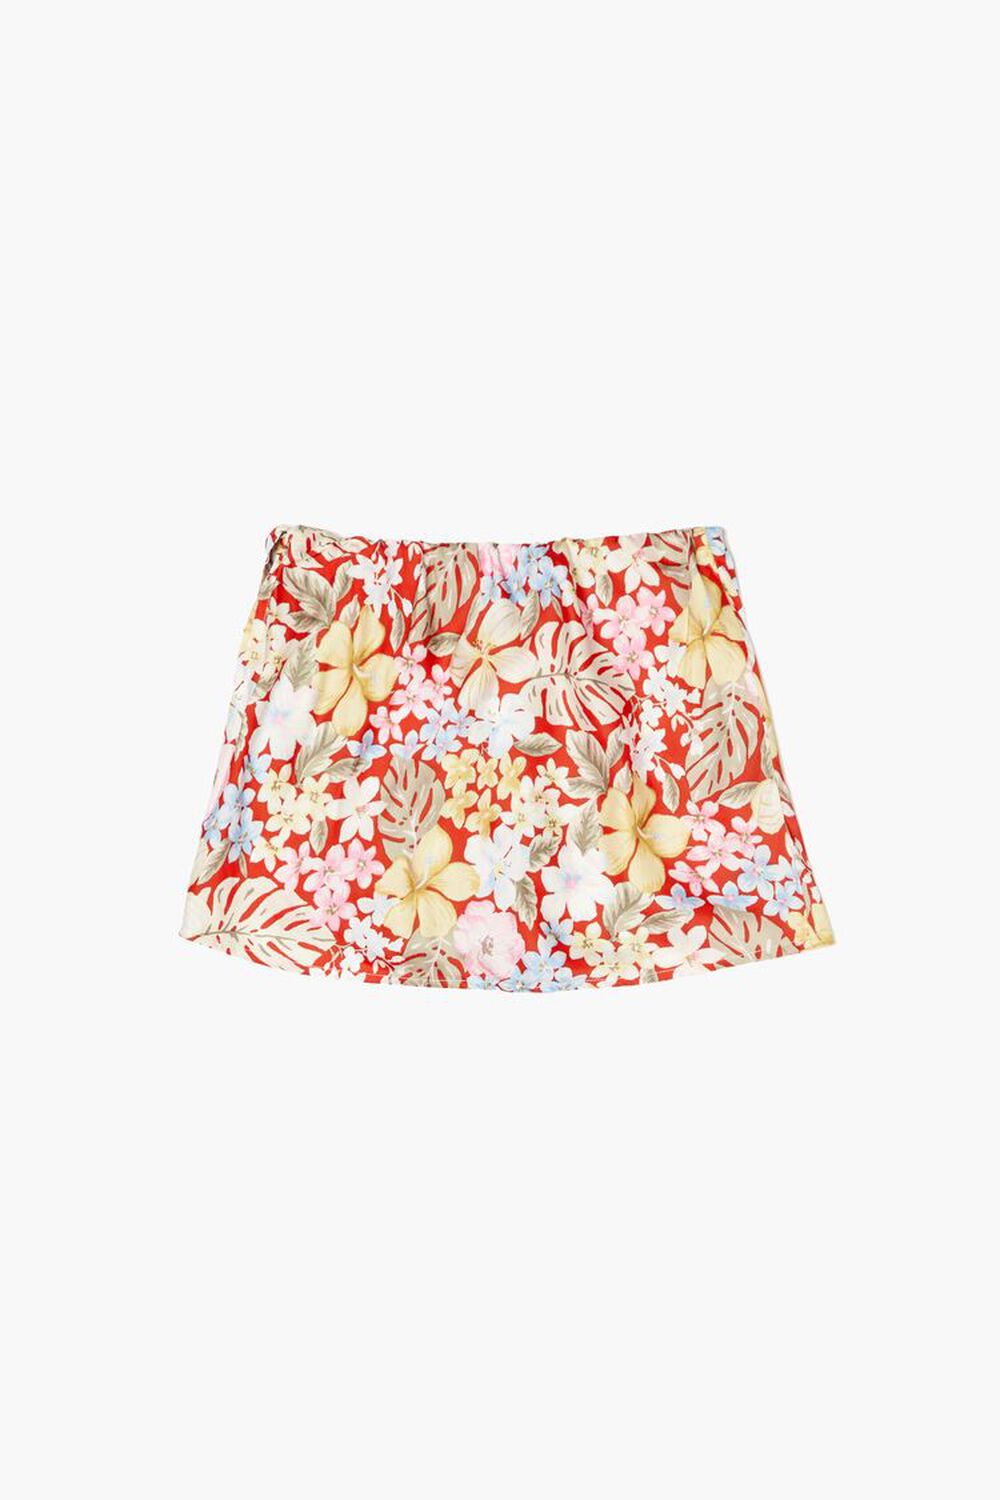 RED/MULTI Girls Tropical Floral Skirt (Kids), image 2